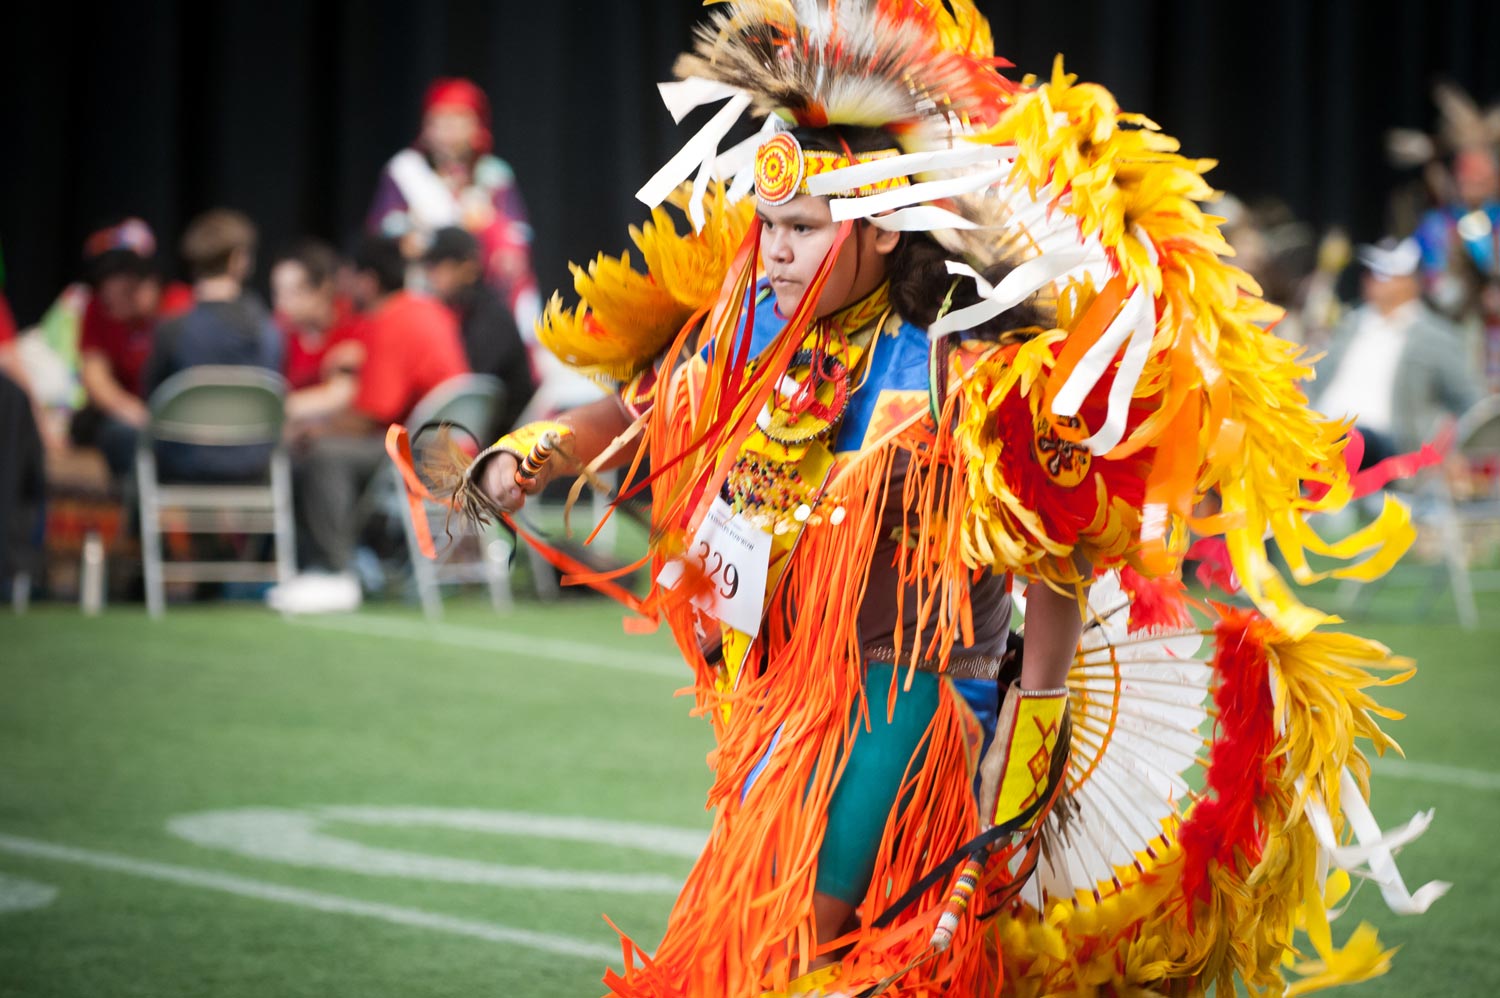 The Native American Pow Wow in the Kibbie Dome